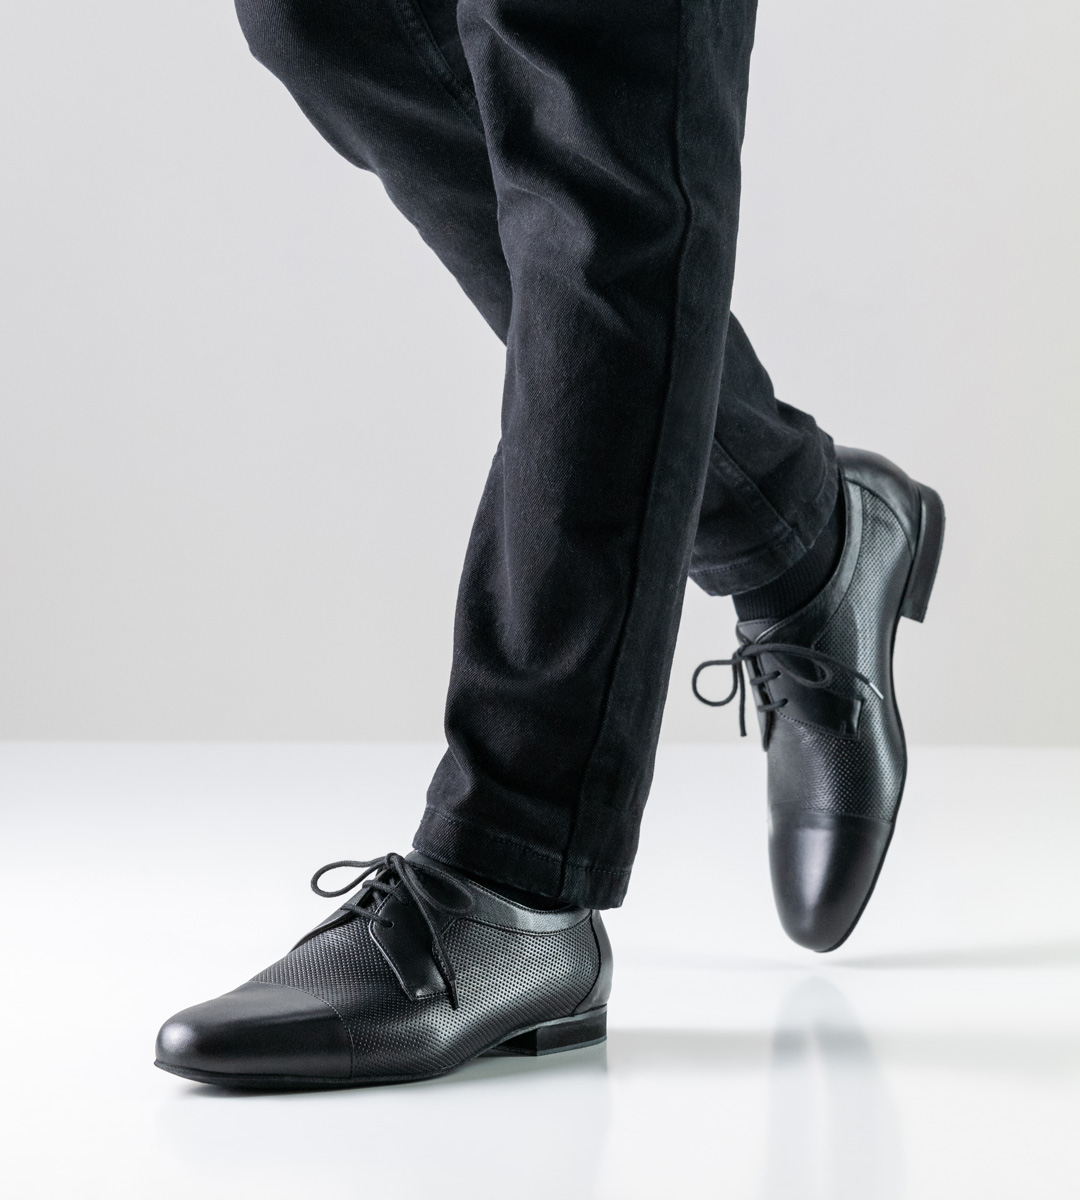 black men's dance shoe by Werner Kern with perforated leather